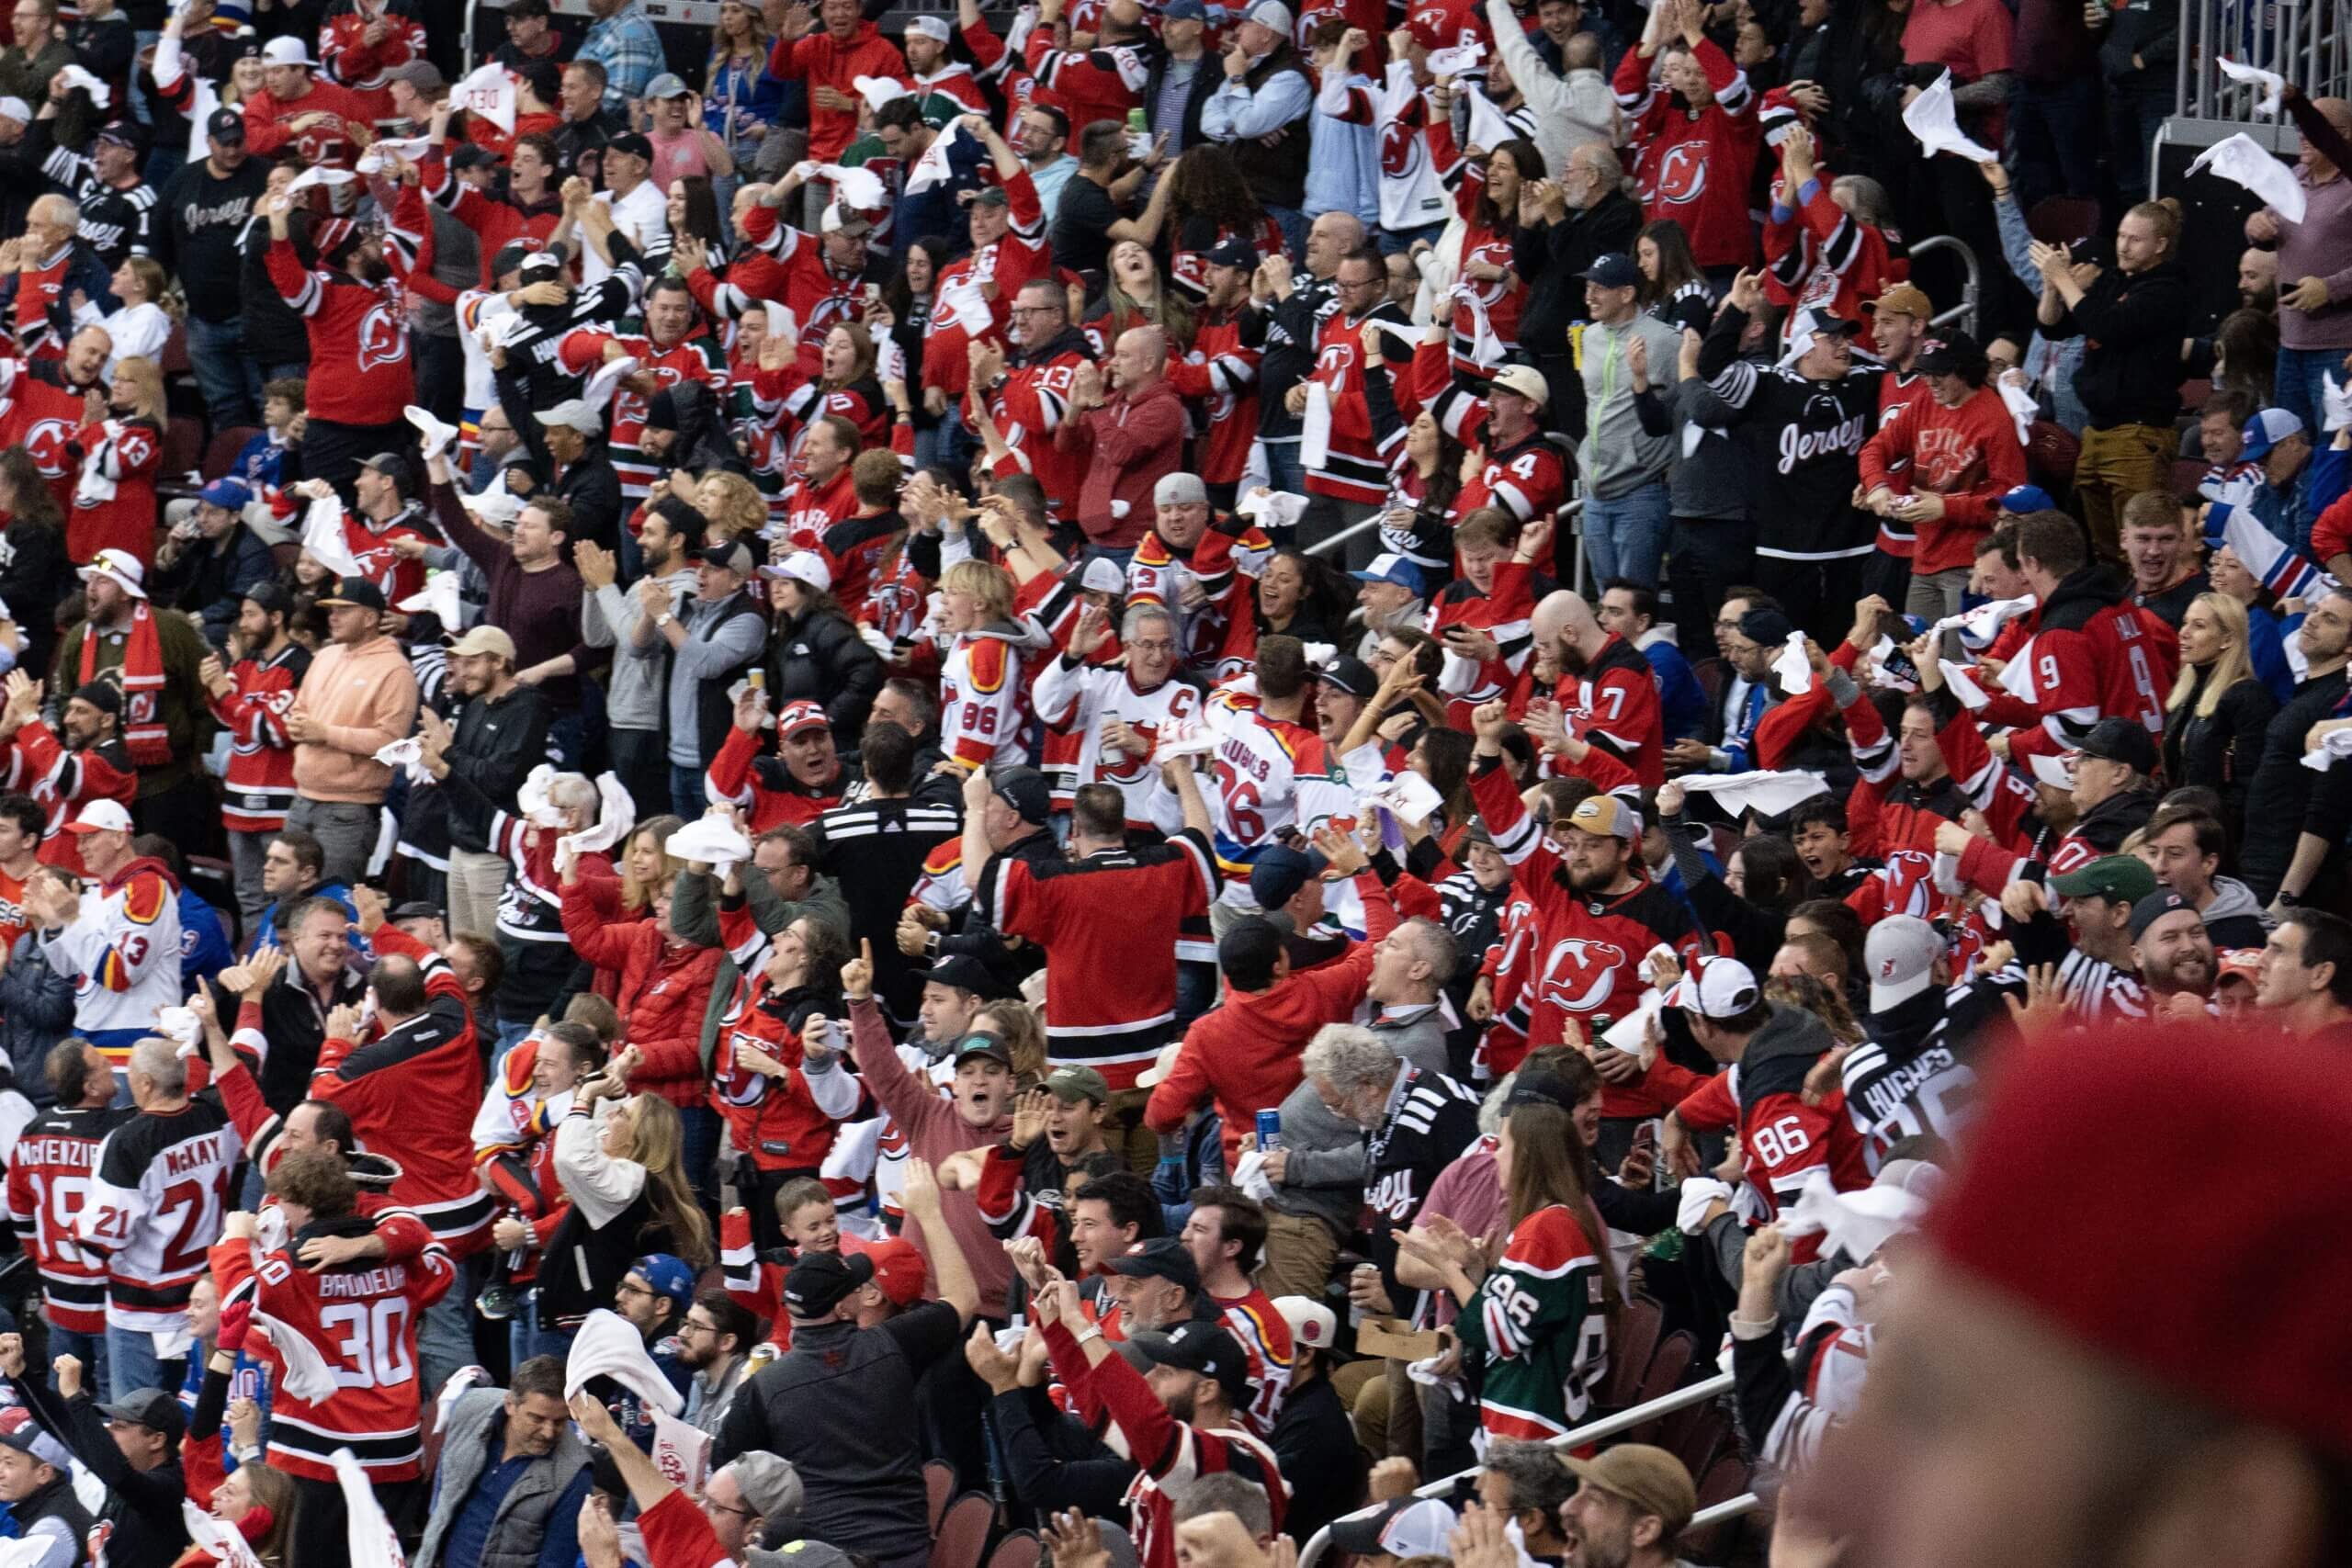 Devils fans celebrate a goal in the second period of the first round of the Stanley Cup Playoffs against the Rangers on May 1, 2023.